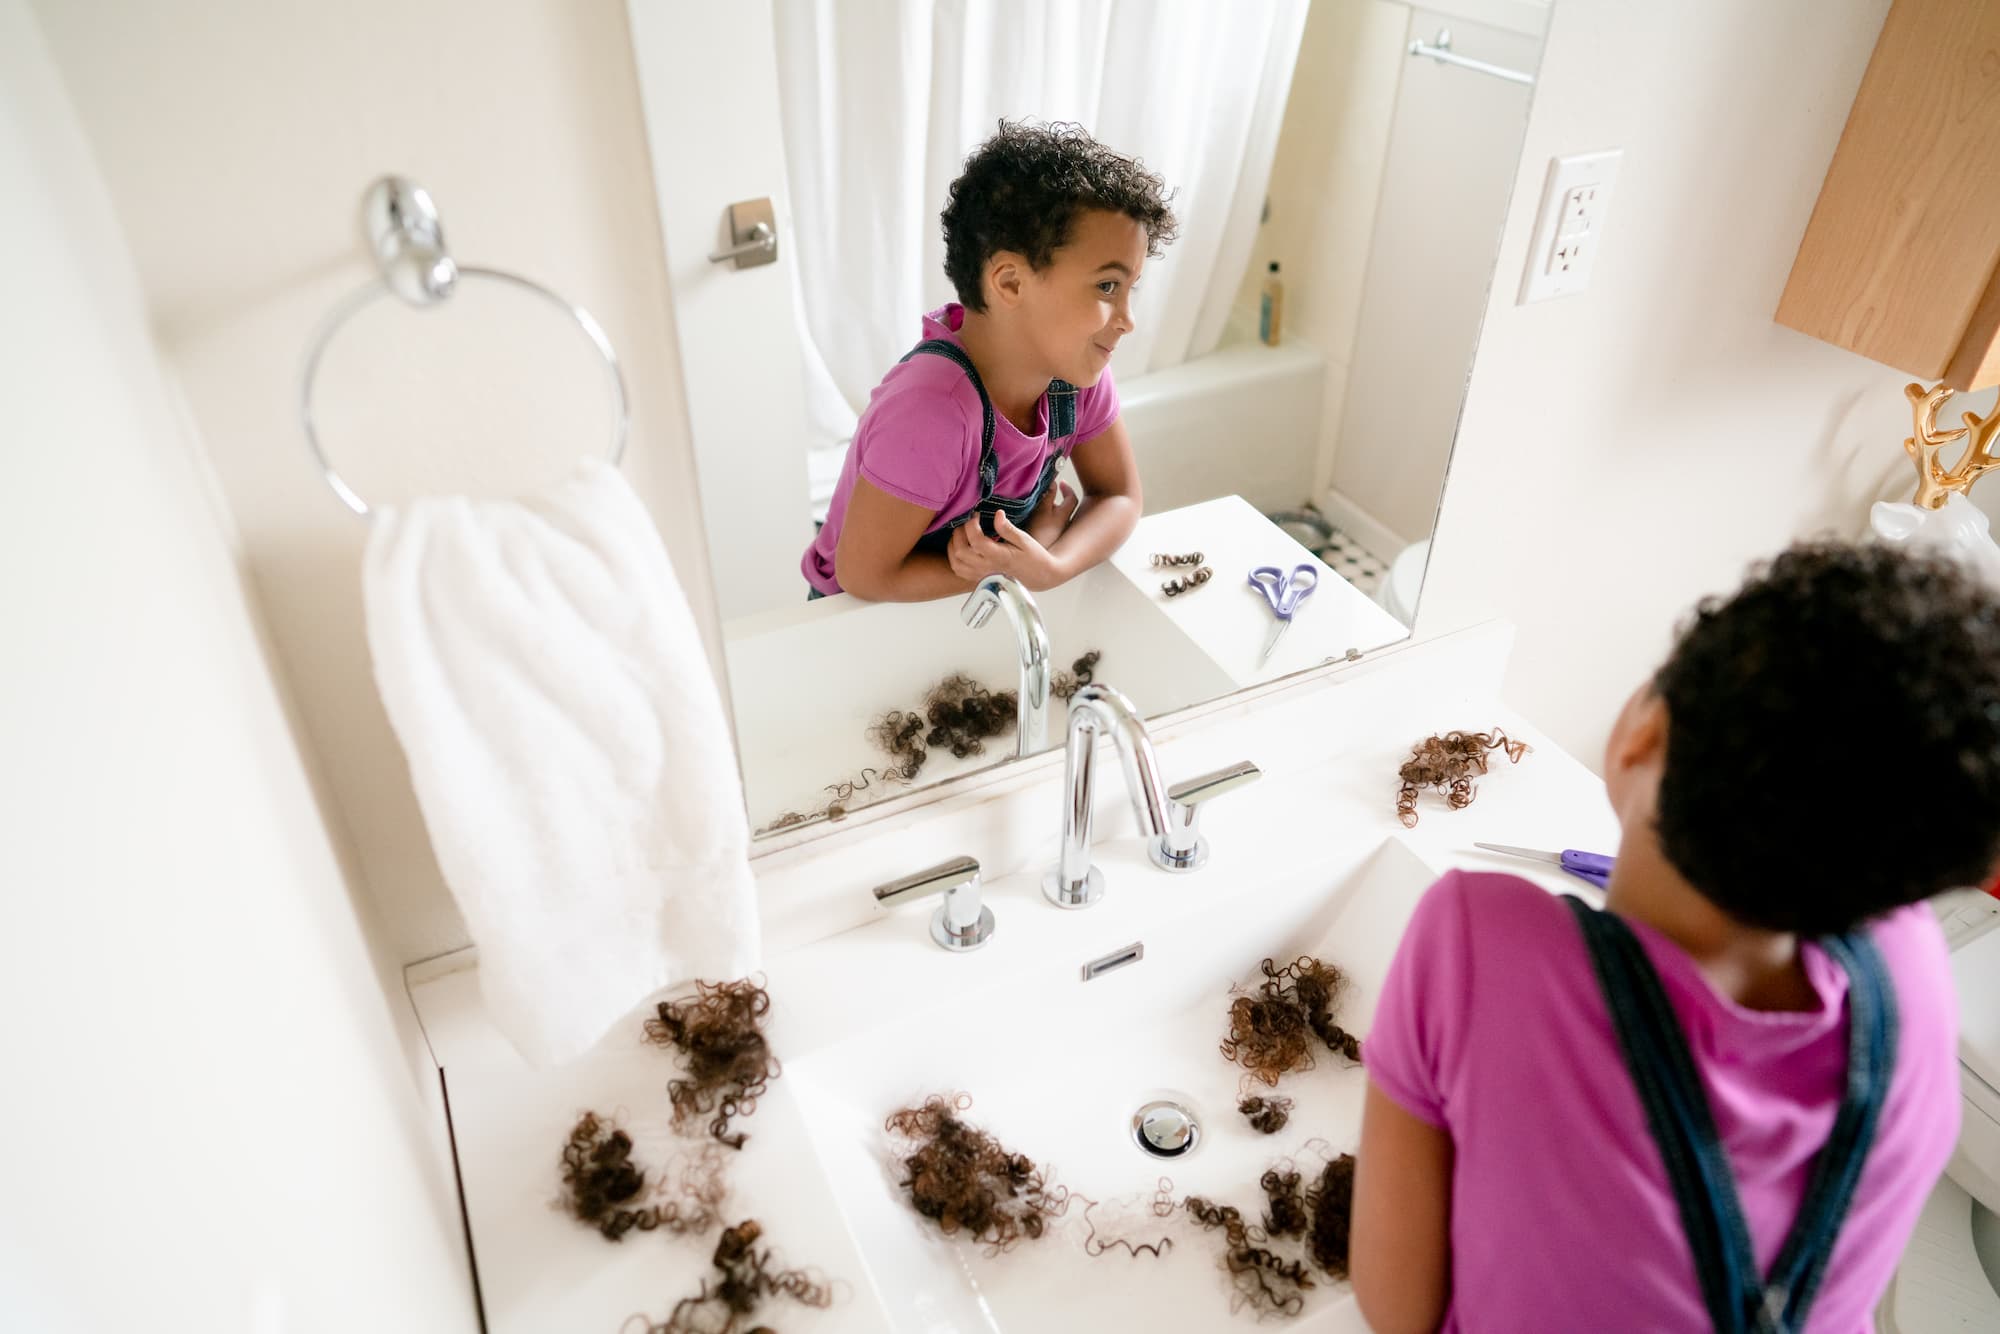 Girl with short, curly hair admires herself in the mirror. The counter in front of her is covered in dark curls and a pair of purple handled scissors rest nearby. Home haircut.